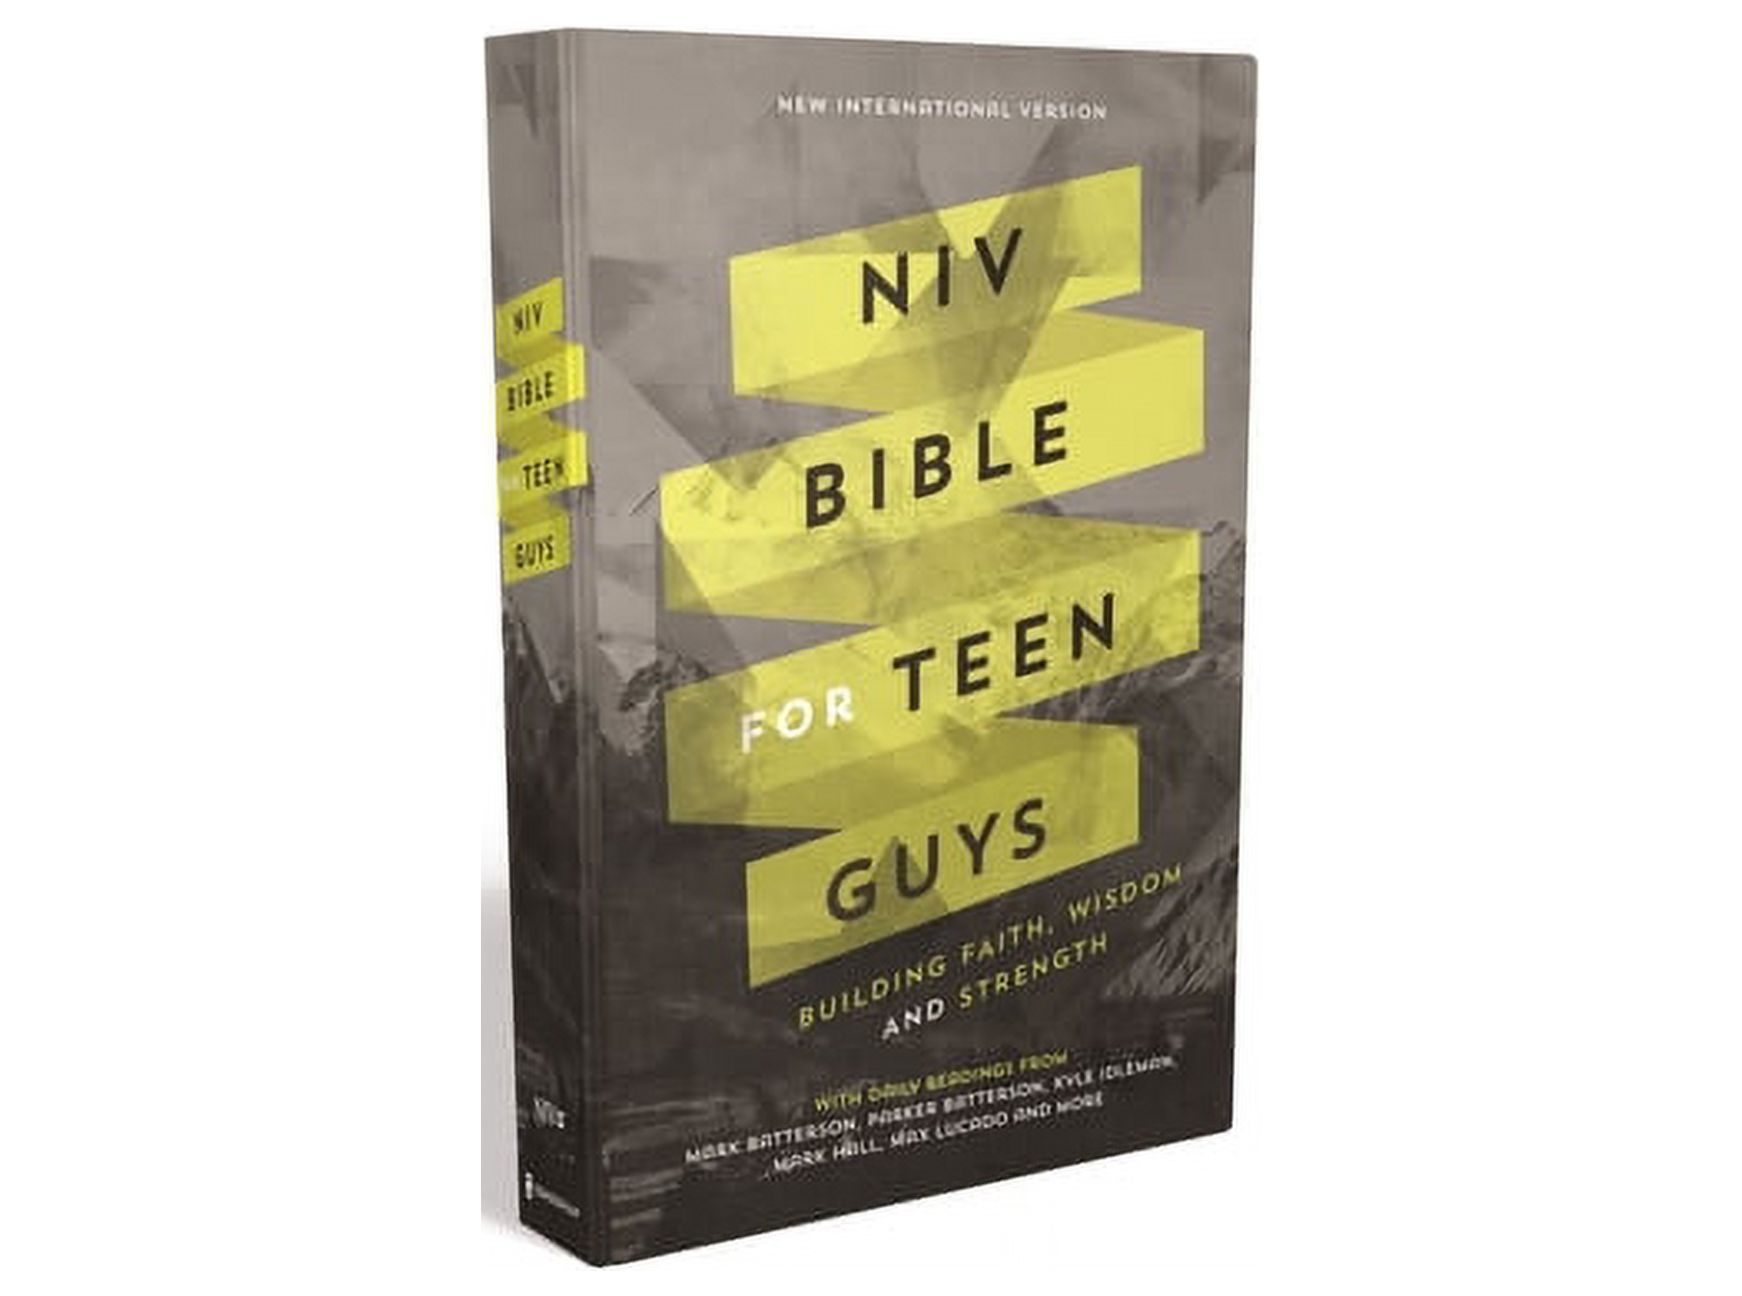 NIV Bible for Teen Guys, Hardcover: Building Faith, Wisdom and Strength (Hardcover) - image 1 of 2